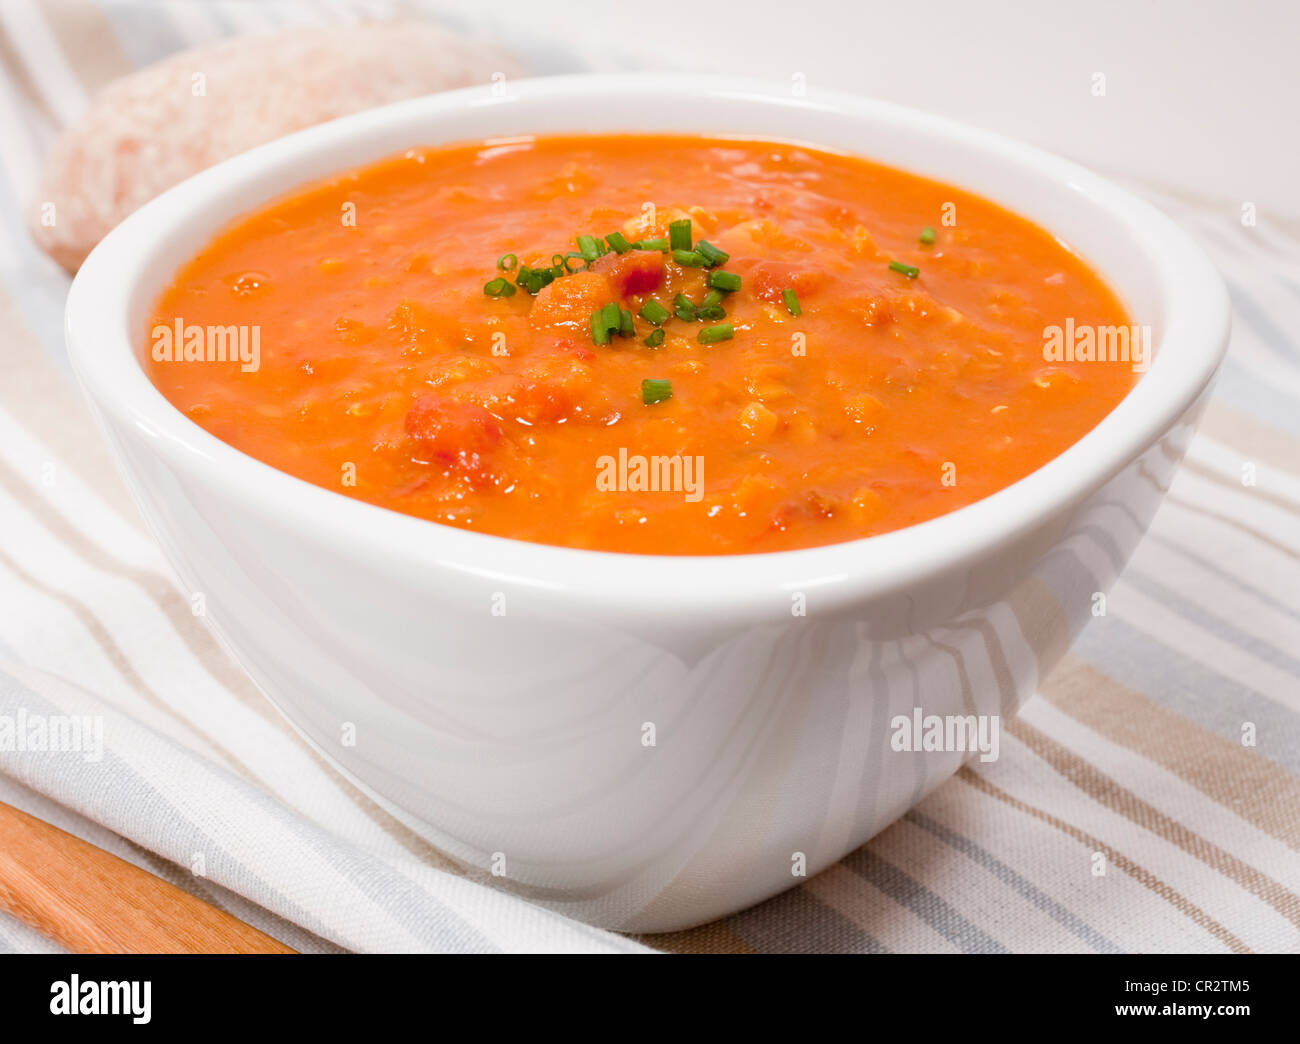 A bowl of lentil and tomato soup garnished with chives. Stock Photo